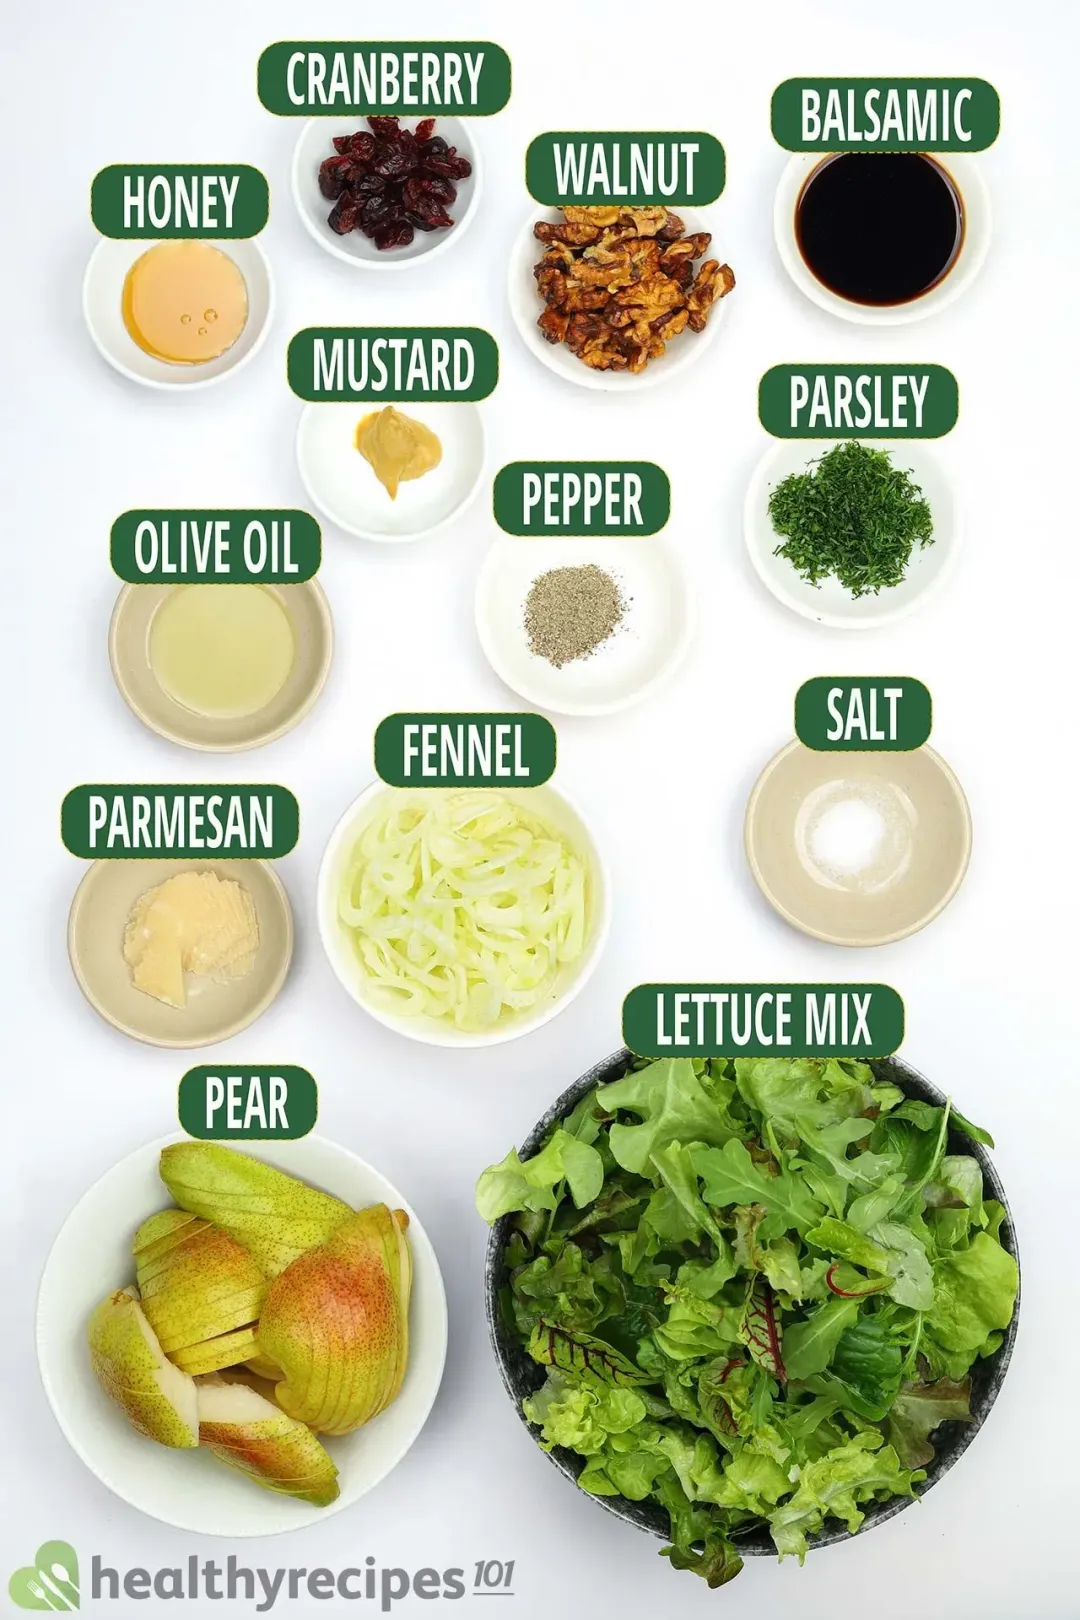 Ingredients for Pear Salad